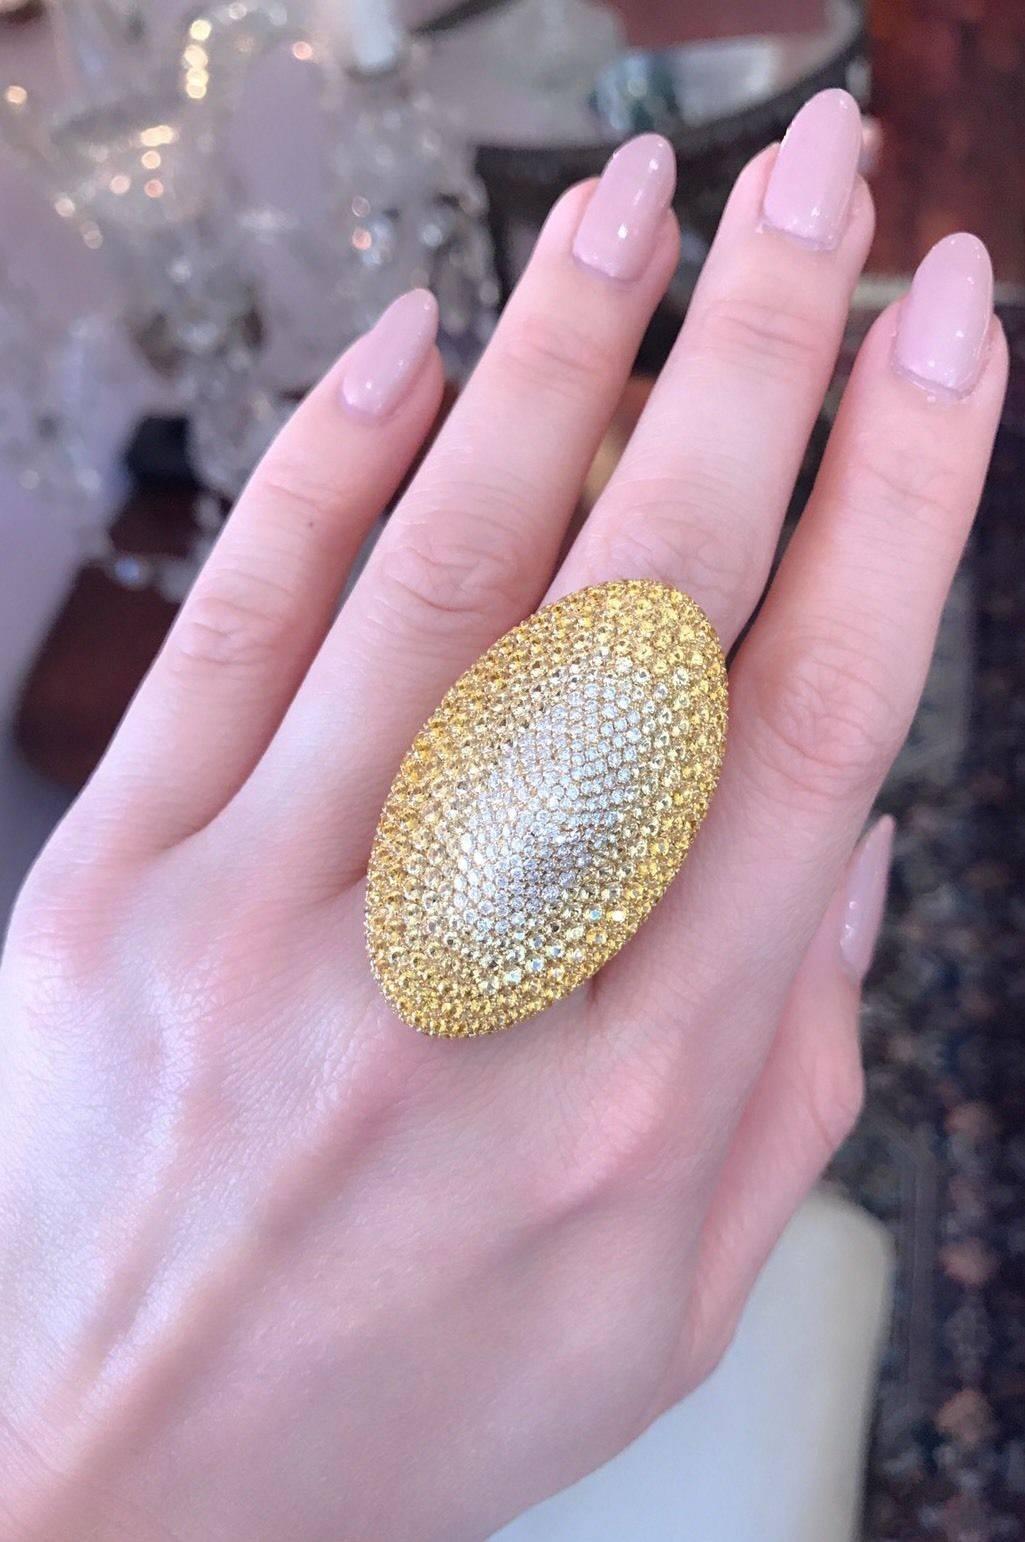 Oval shaped pave cocktail ring by Palmiero featuring 
A beautiful gradient color of yellow sapphires that gradually blend into white diamonds in the center. 
7.18 carats of Yellow Sapphire and 1.24 carats of white diamonds for a total of  8.42